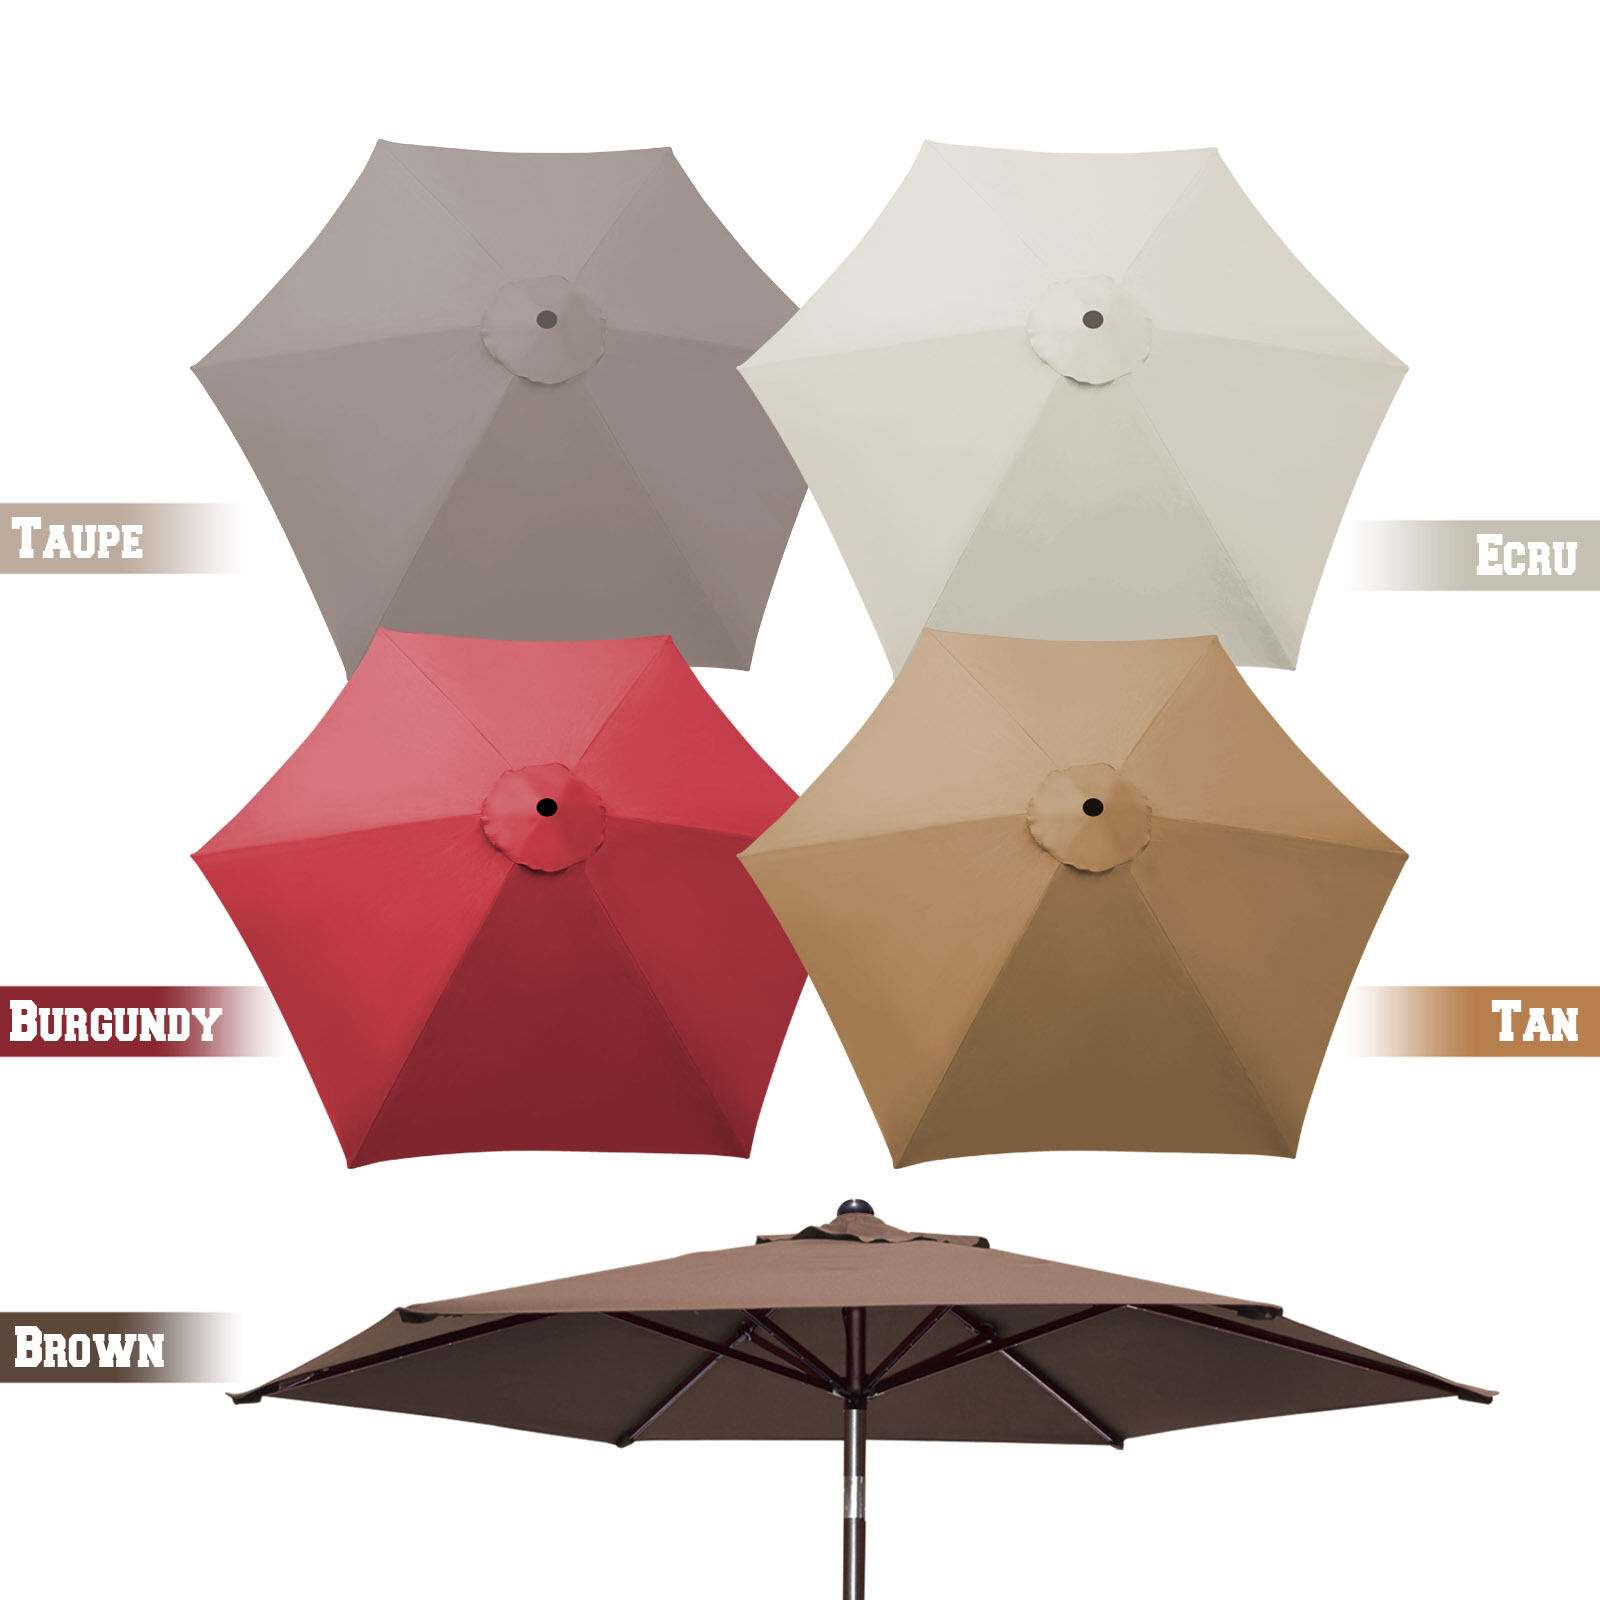 8.2ft 6 Ribs Patio Umbrella Canopy Replacement Parasol Sunshade Top Cover Only